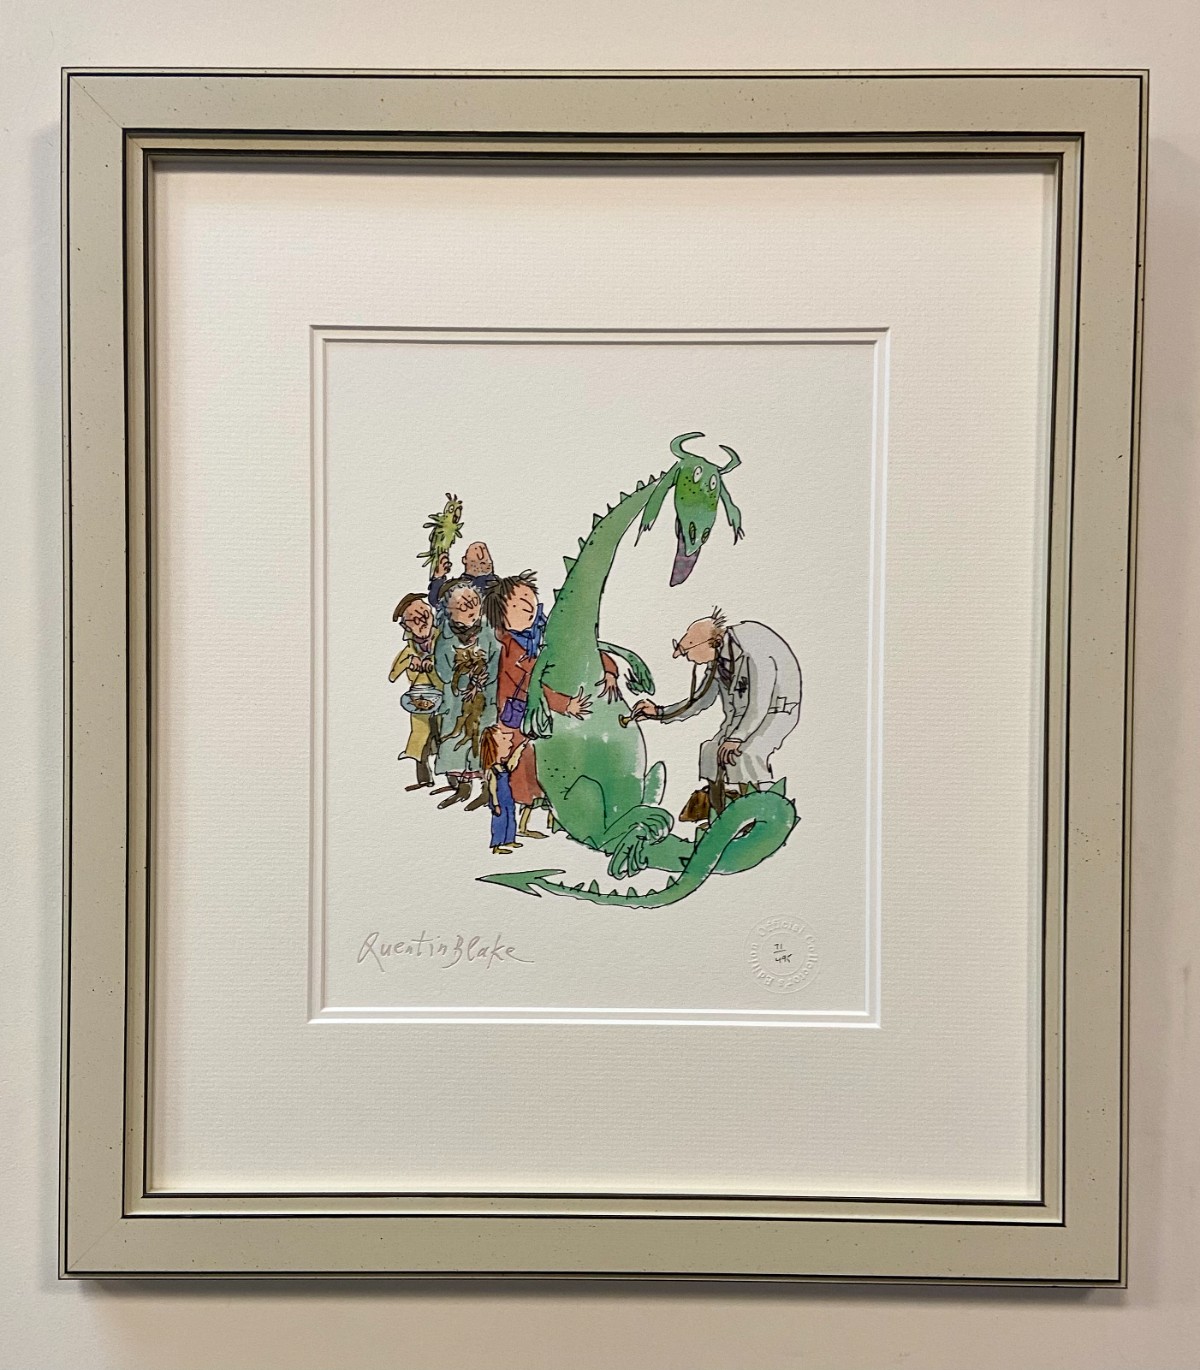 V is for Vet by Quentin Blake